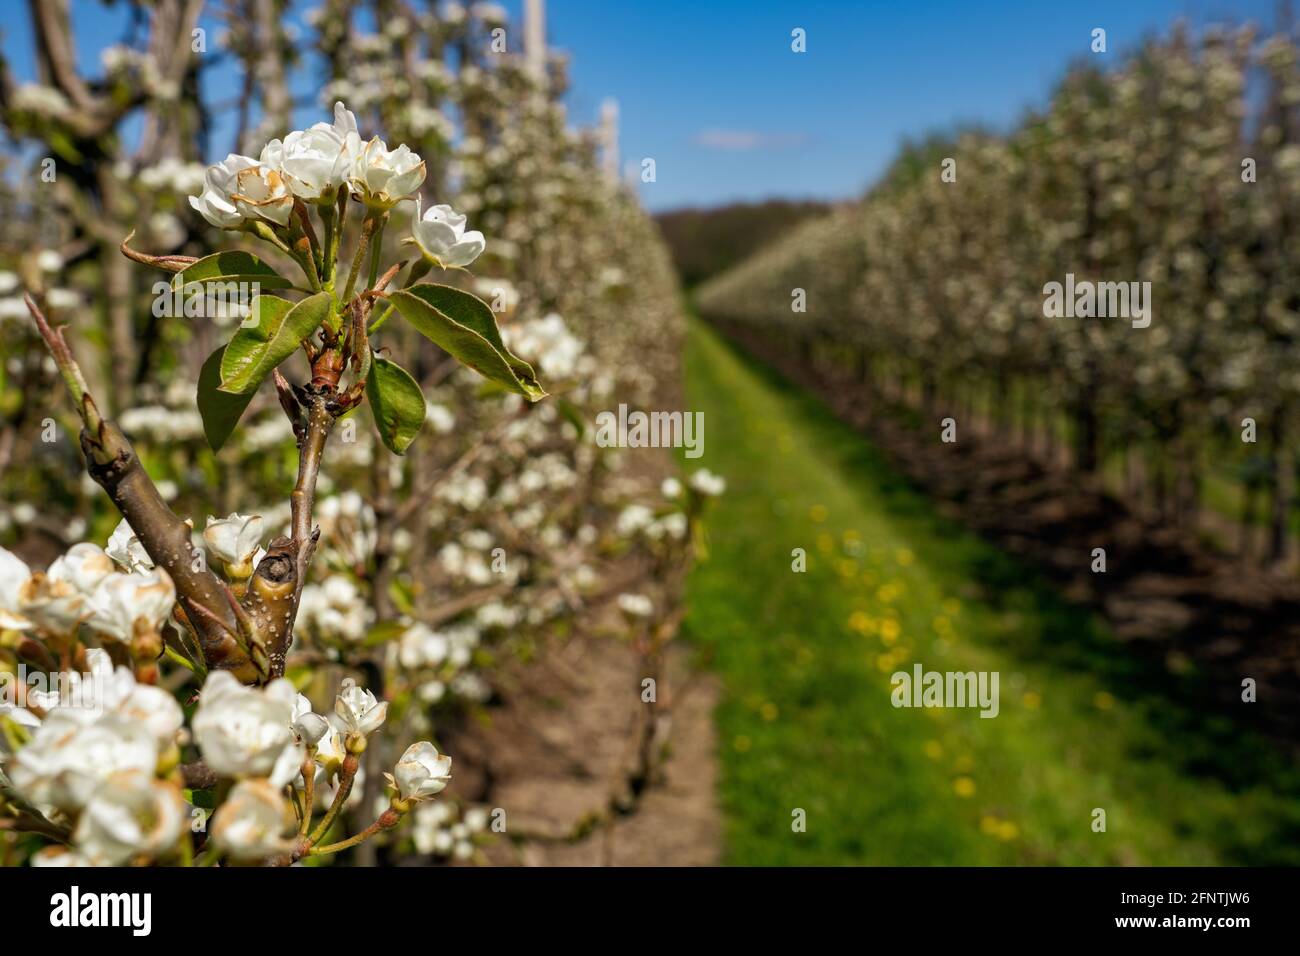 Field of fruit trees in white blossom Stock Photo